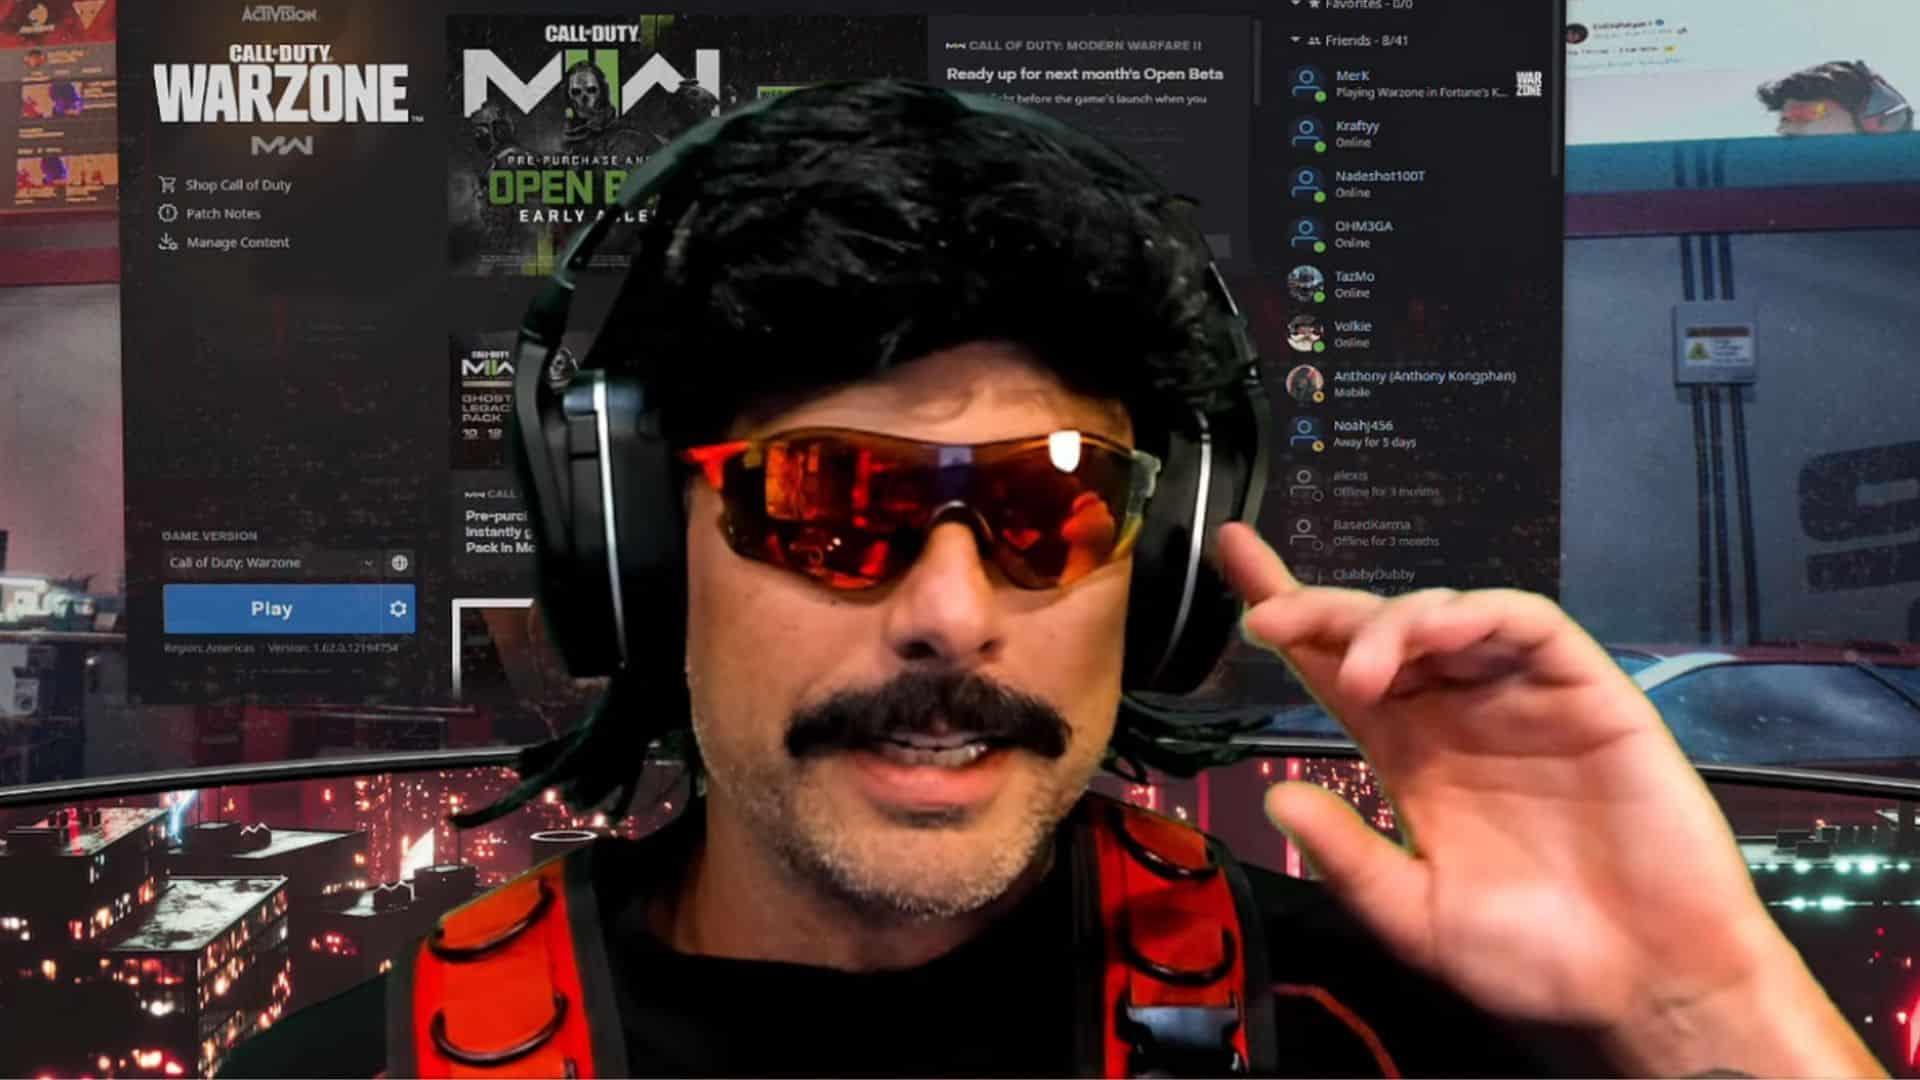 Dr Disrespect pointing to his head next to Warzone menu